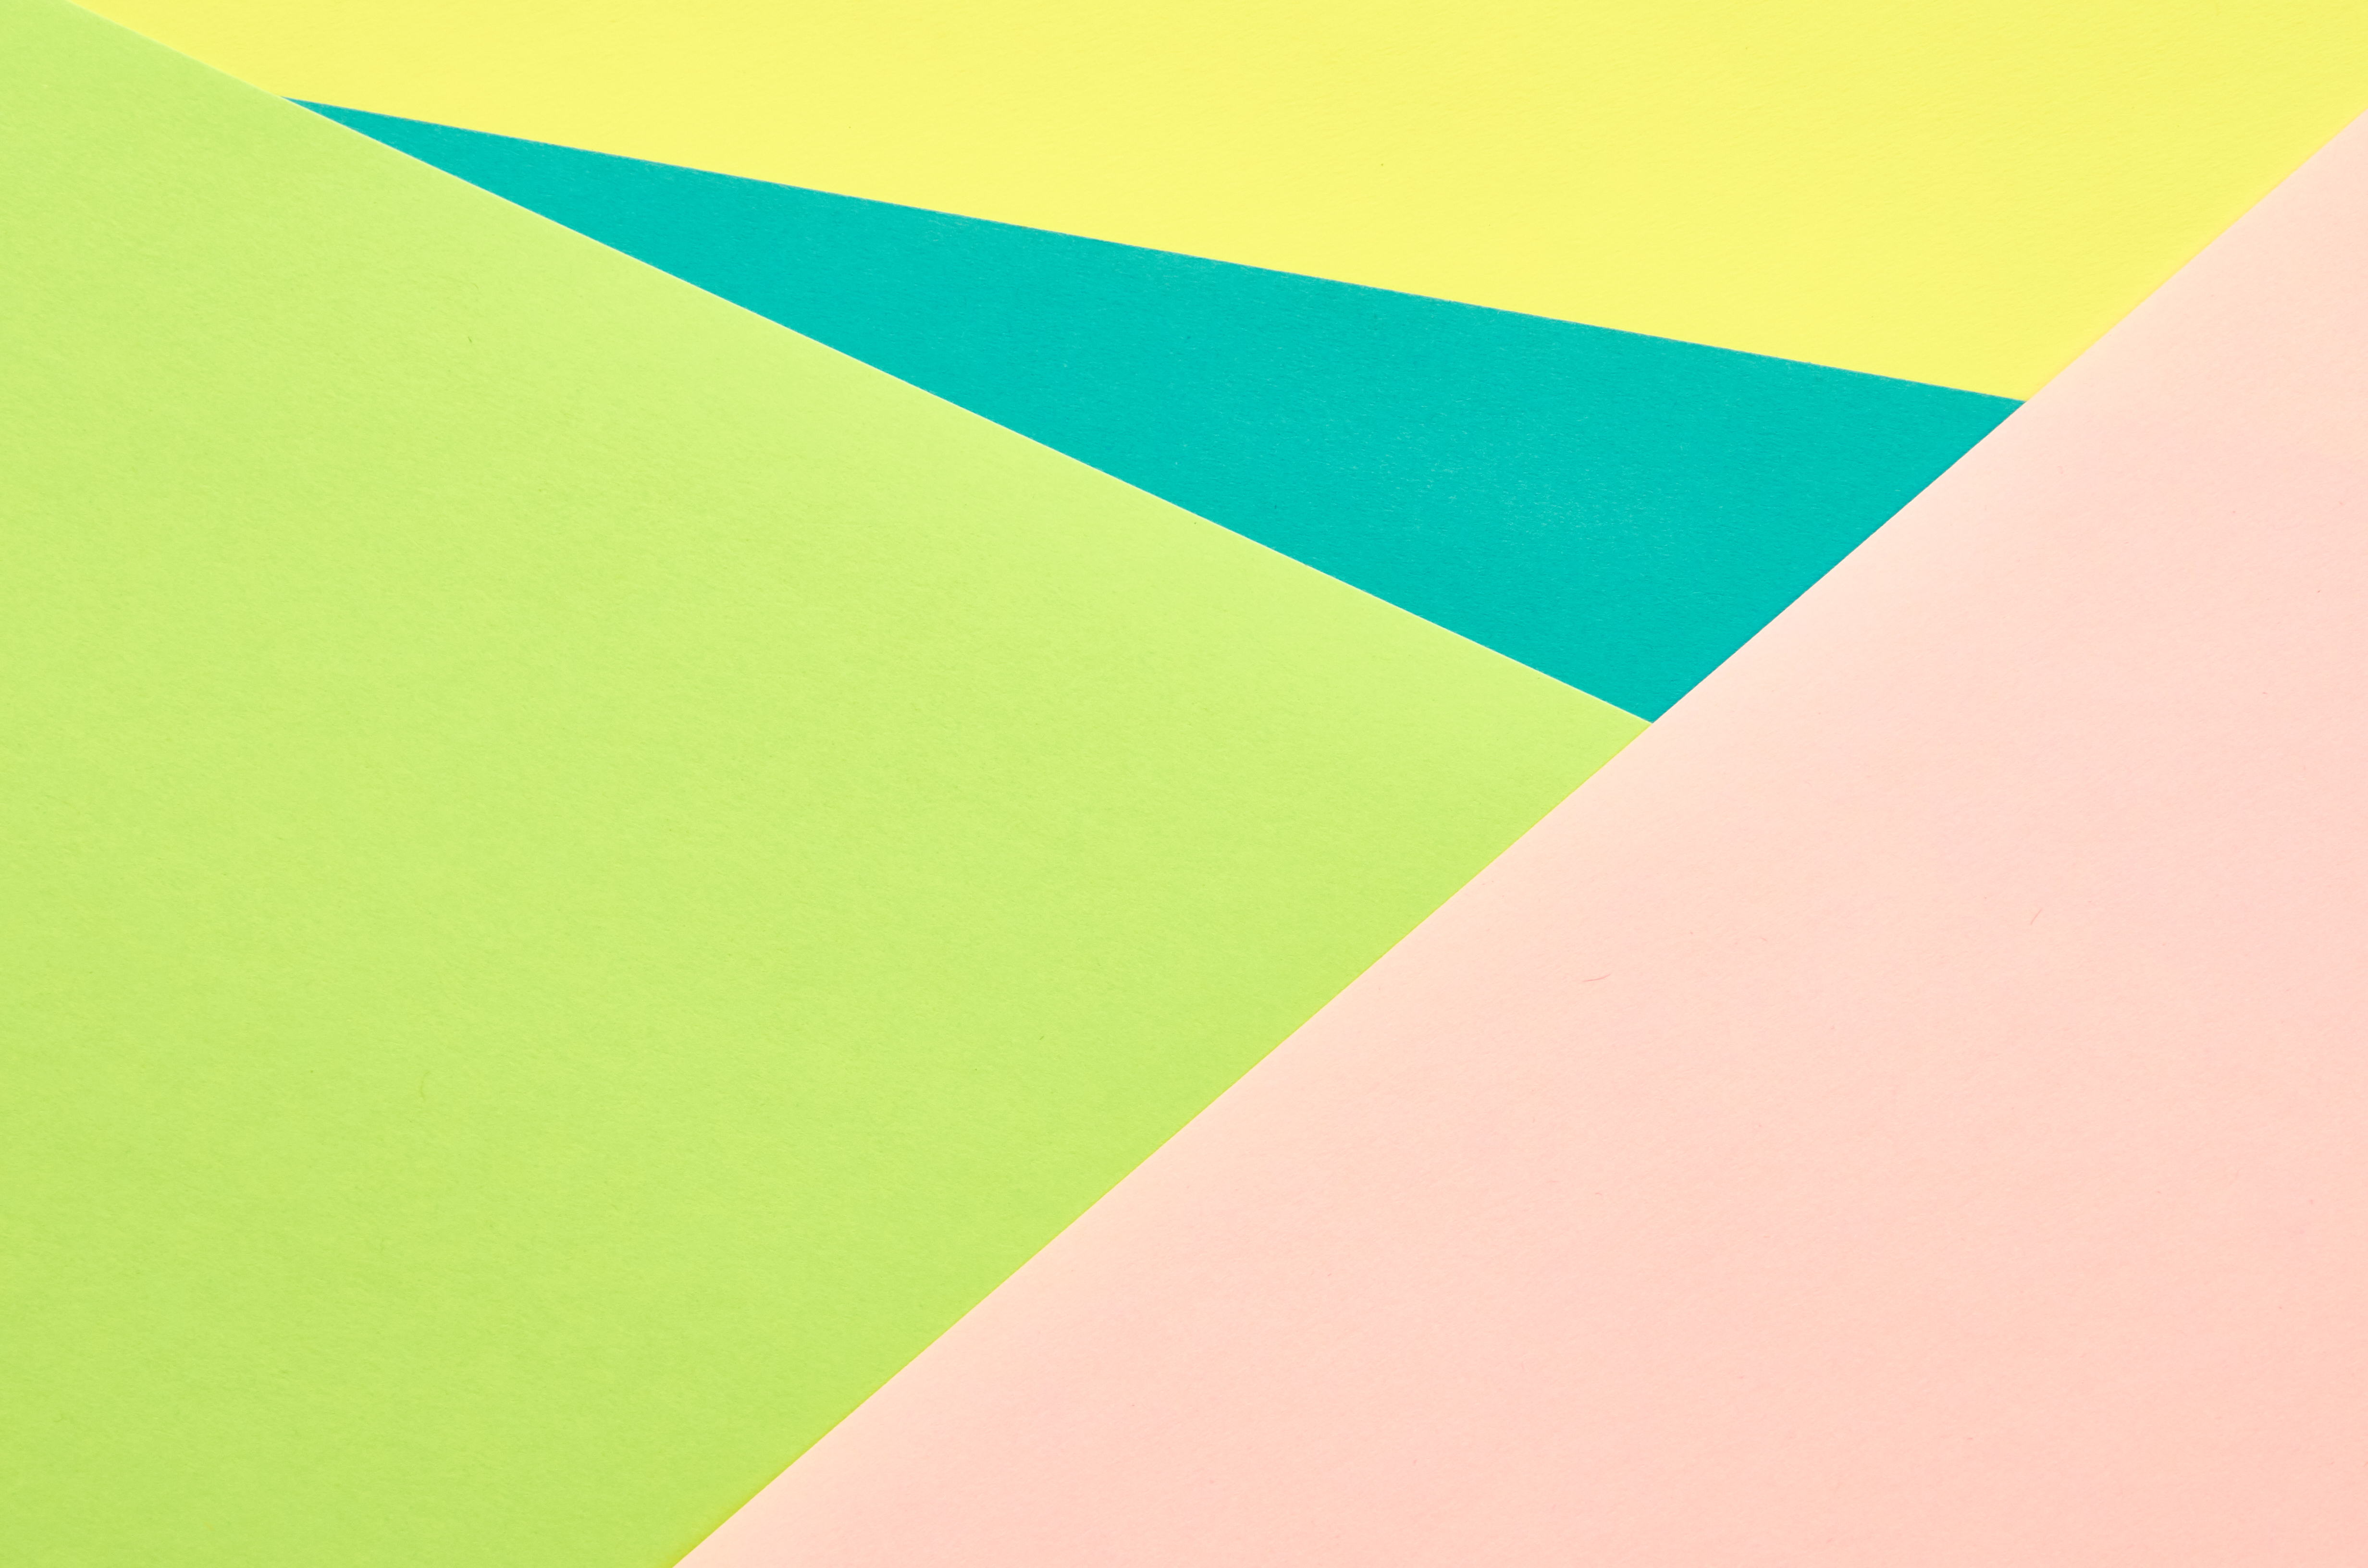 motley, multicolored, abstract, shape, shapes, triangles, fragments lock screen backgrounds